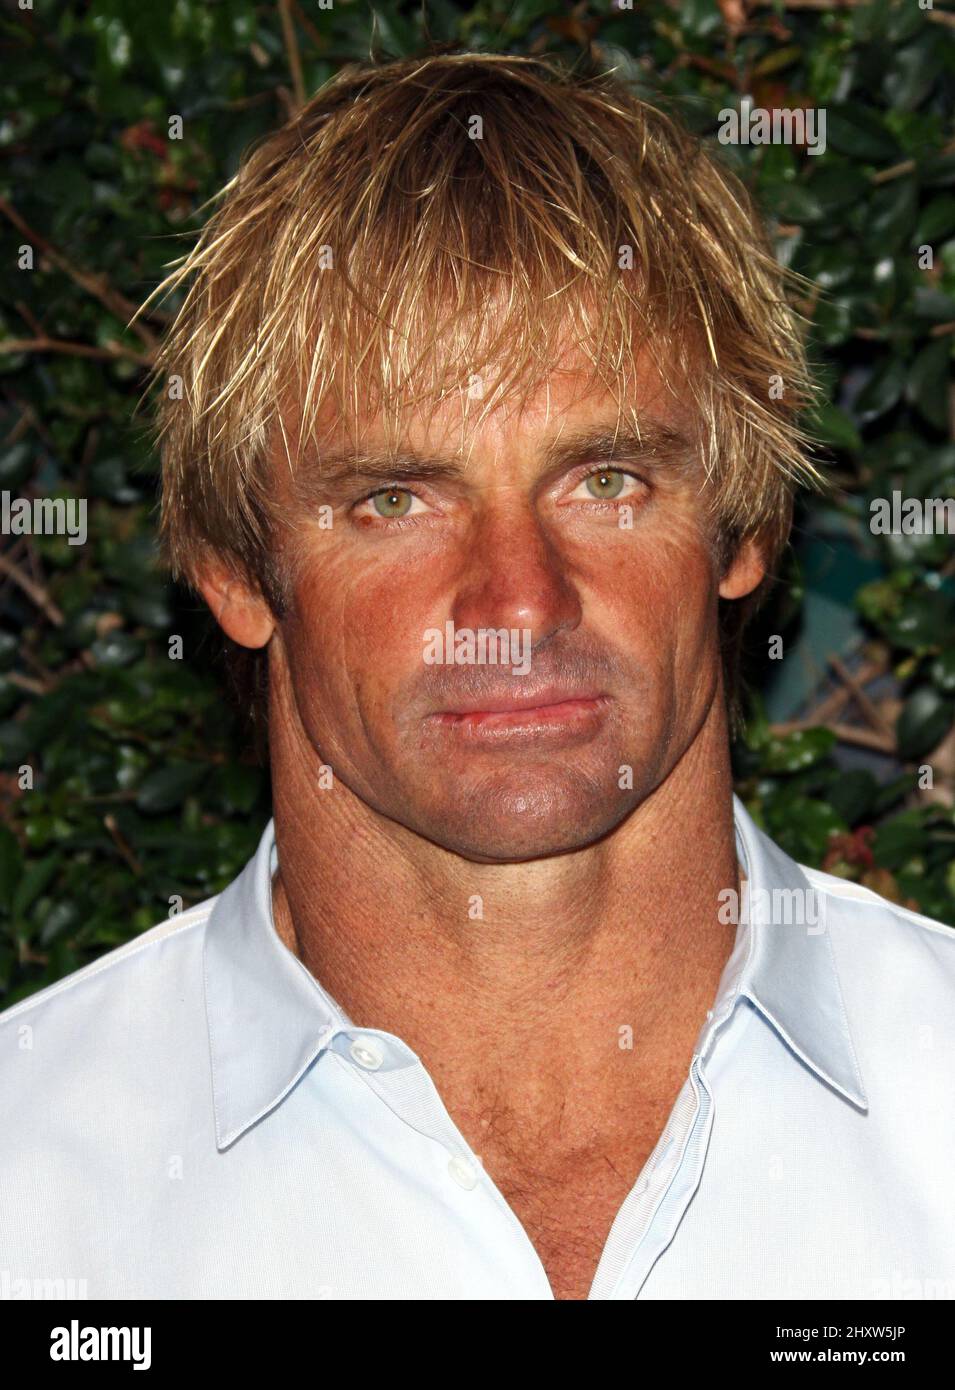 Laird Hamilton during Chanel's Benefit Dinner for Natural Resources Defense Council's Oceans Initiative in Malibu, California Stock Photo